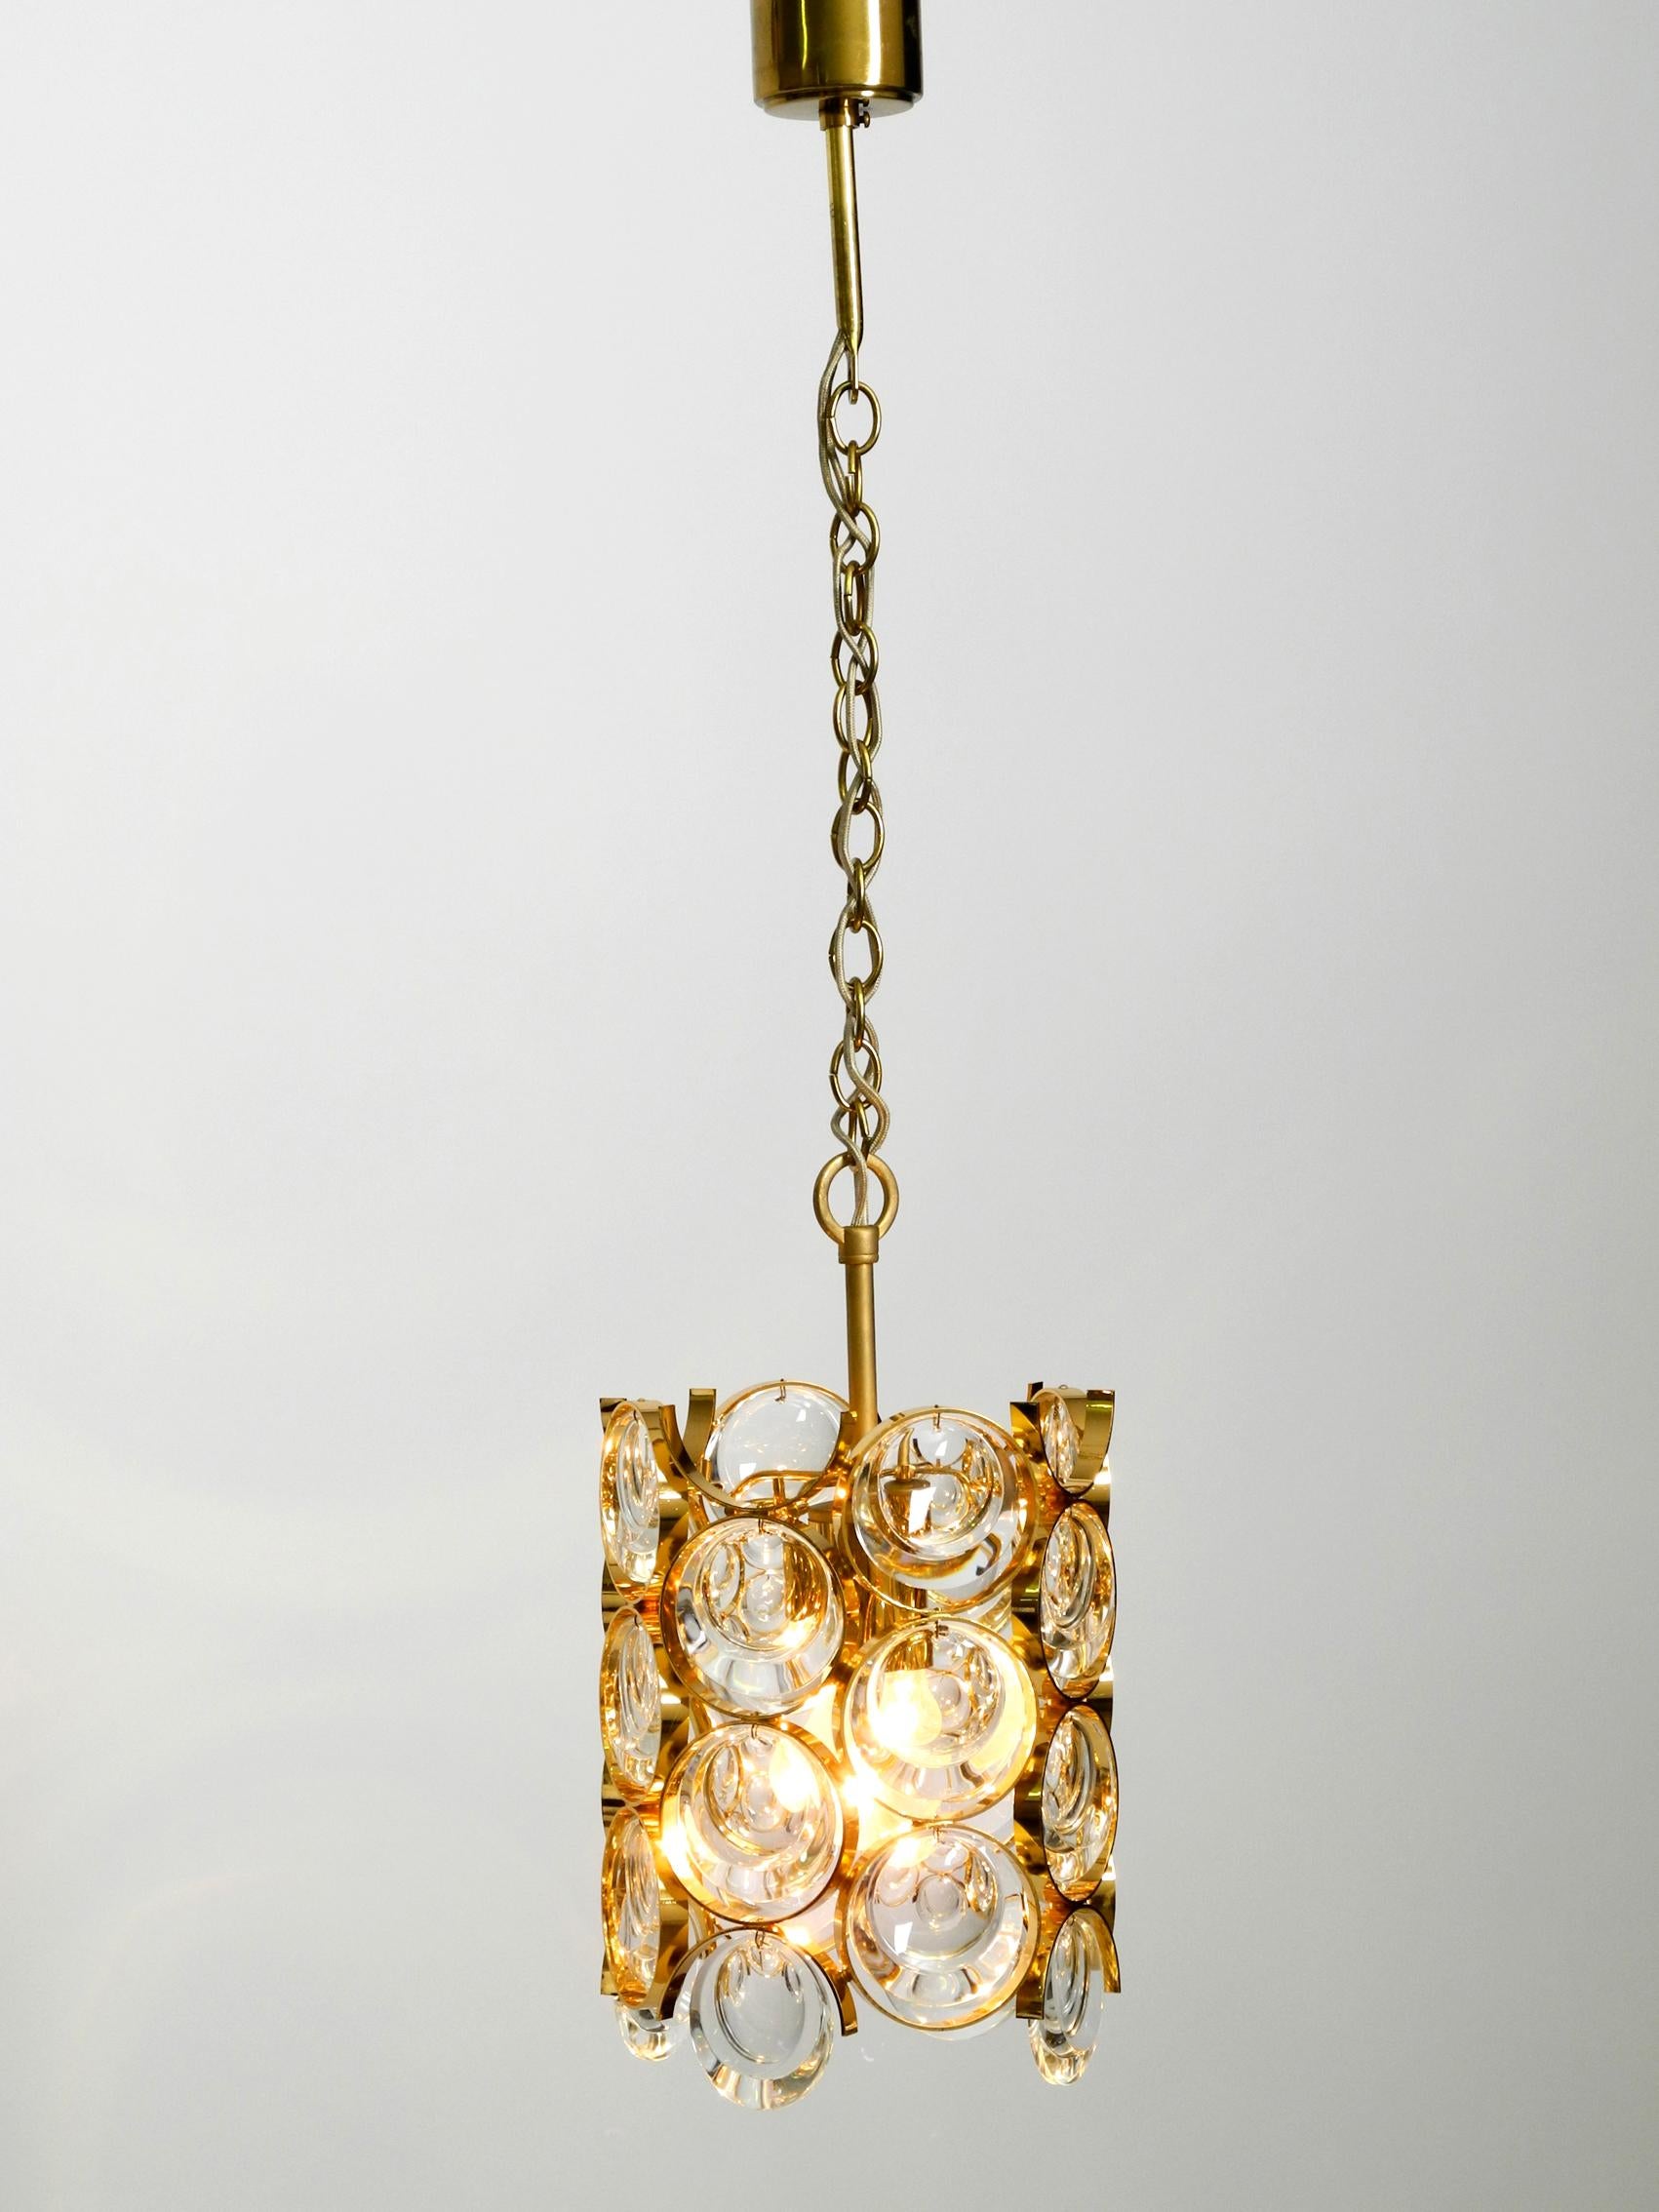 Beautiful very luxurious 1960s small Palwa ceiling pendant lamp with heavy brass frame and large crystal stones. Lamp frame, chain and canopy are made of brass. It has been manufactured by Palme & Walter in the 1960s. Made in Germany. Shiny brass